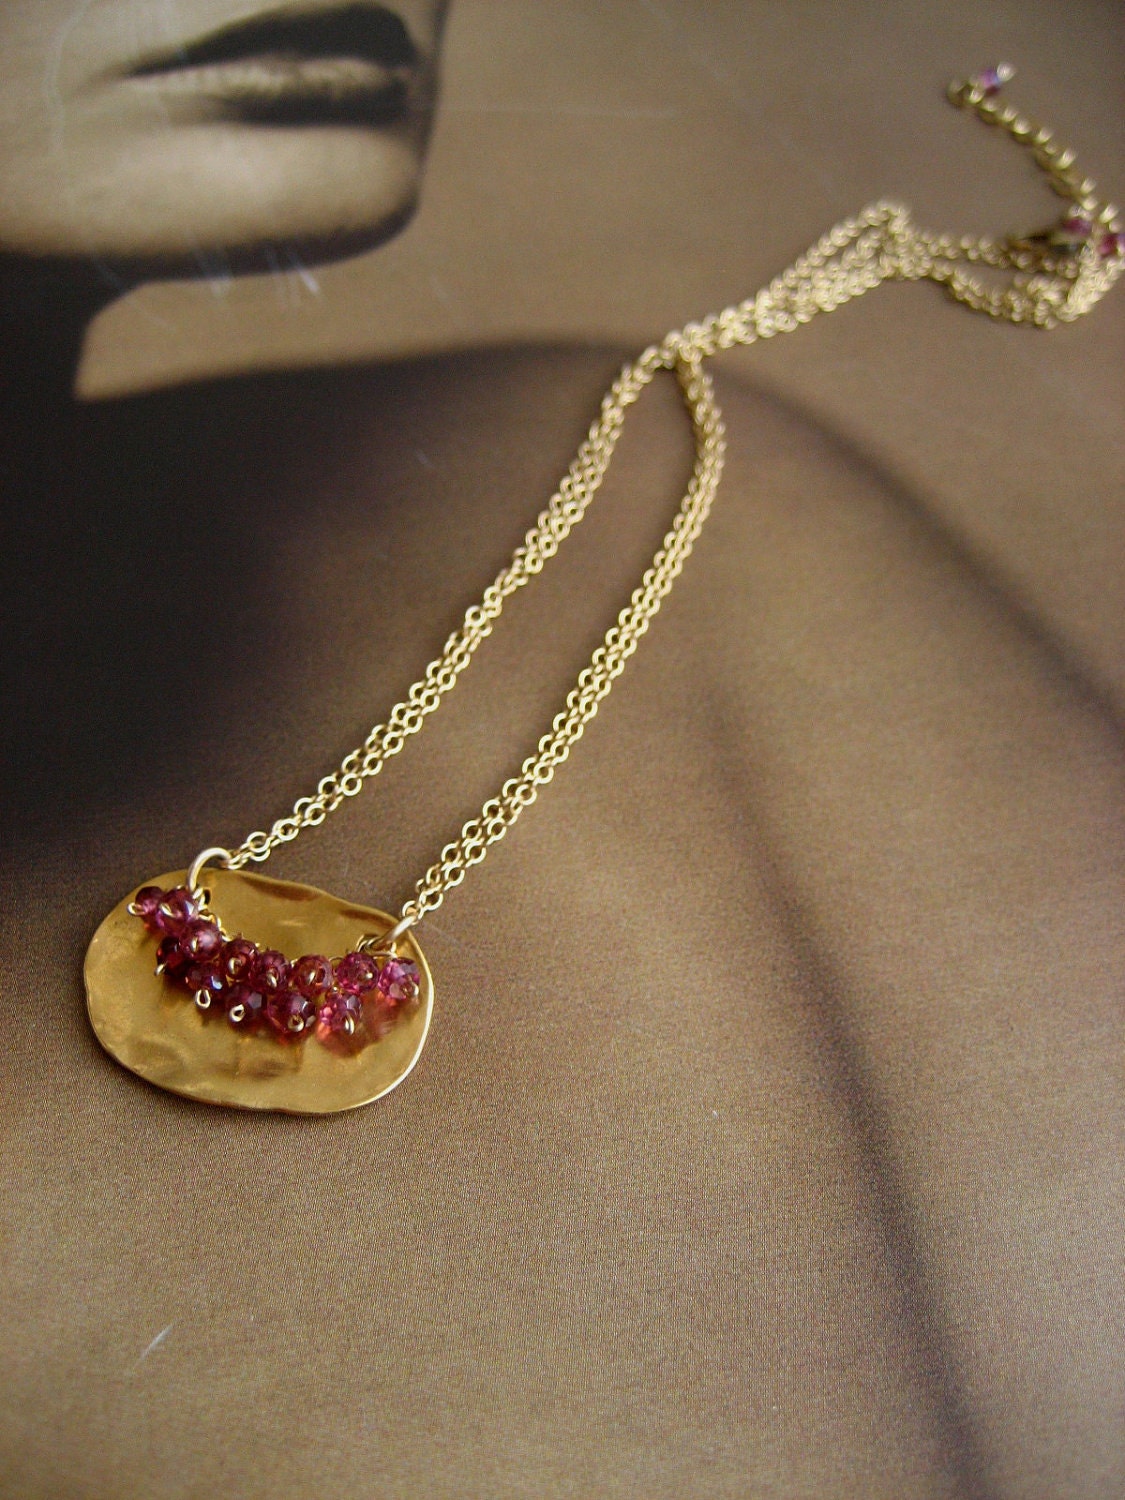 Vermeil and rhodolite organic plaque necklace - solid sterling silver pendant with 14k gold plating - ElfiRoose